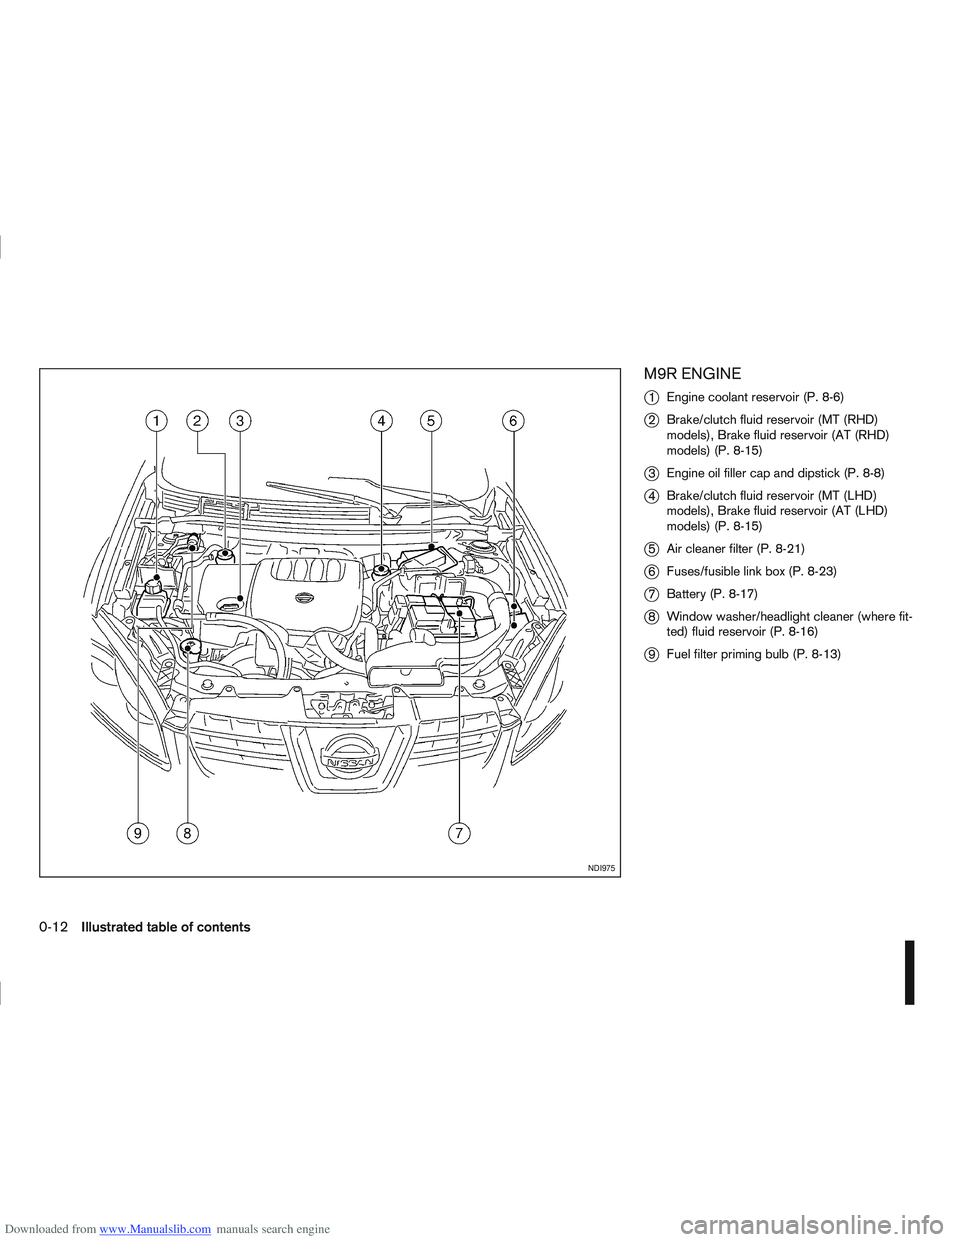 NISSAN QASHQAI 2013  Owners Manual Downloaded from www.Manualslib.com manuals search engine M9R ENGINE
j
1Engine coolant reservoir (P. 8-6)
j2Brake/clutch fluid reservoir (MT (RHD)
models), Brake fluid reservoir (AT (RHD)
models) (P. 8